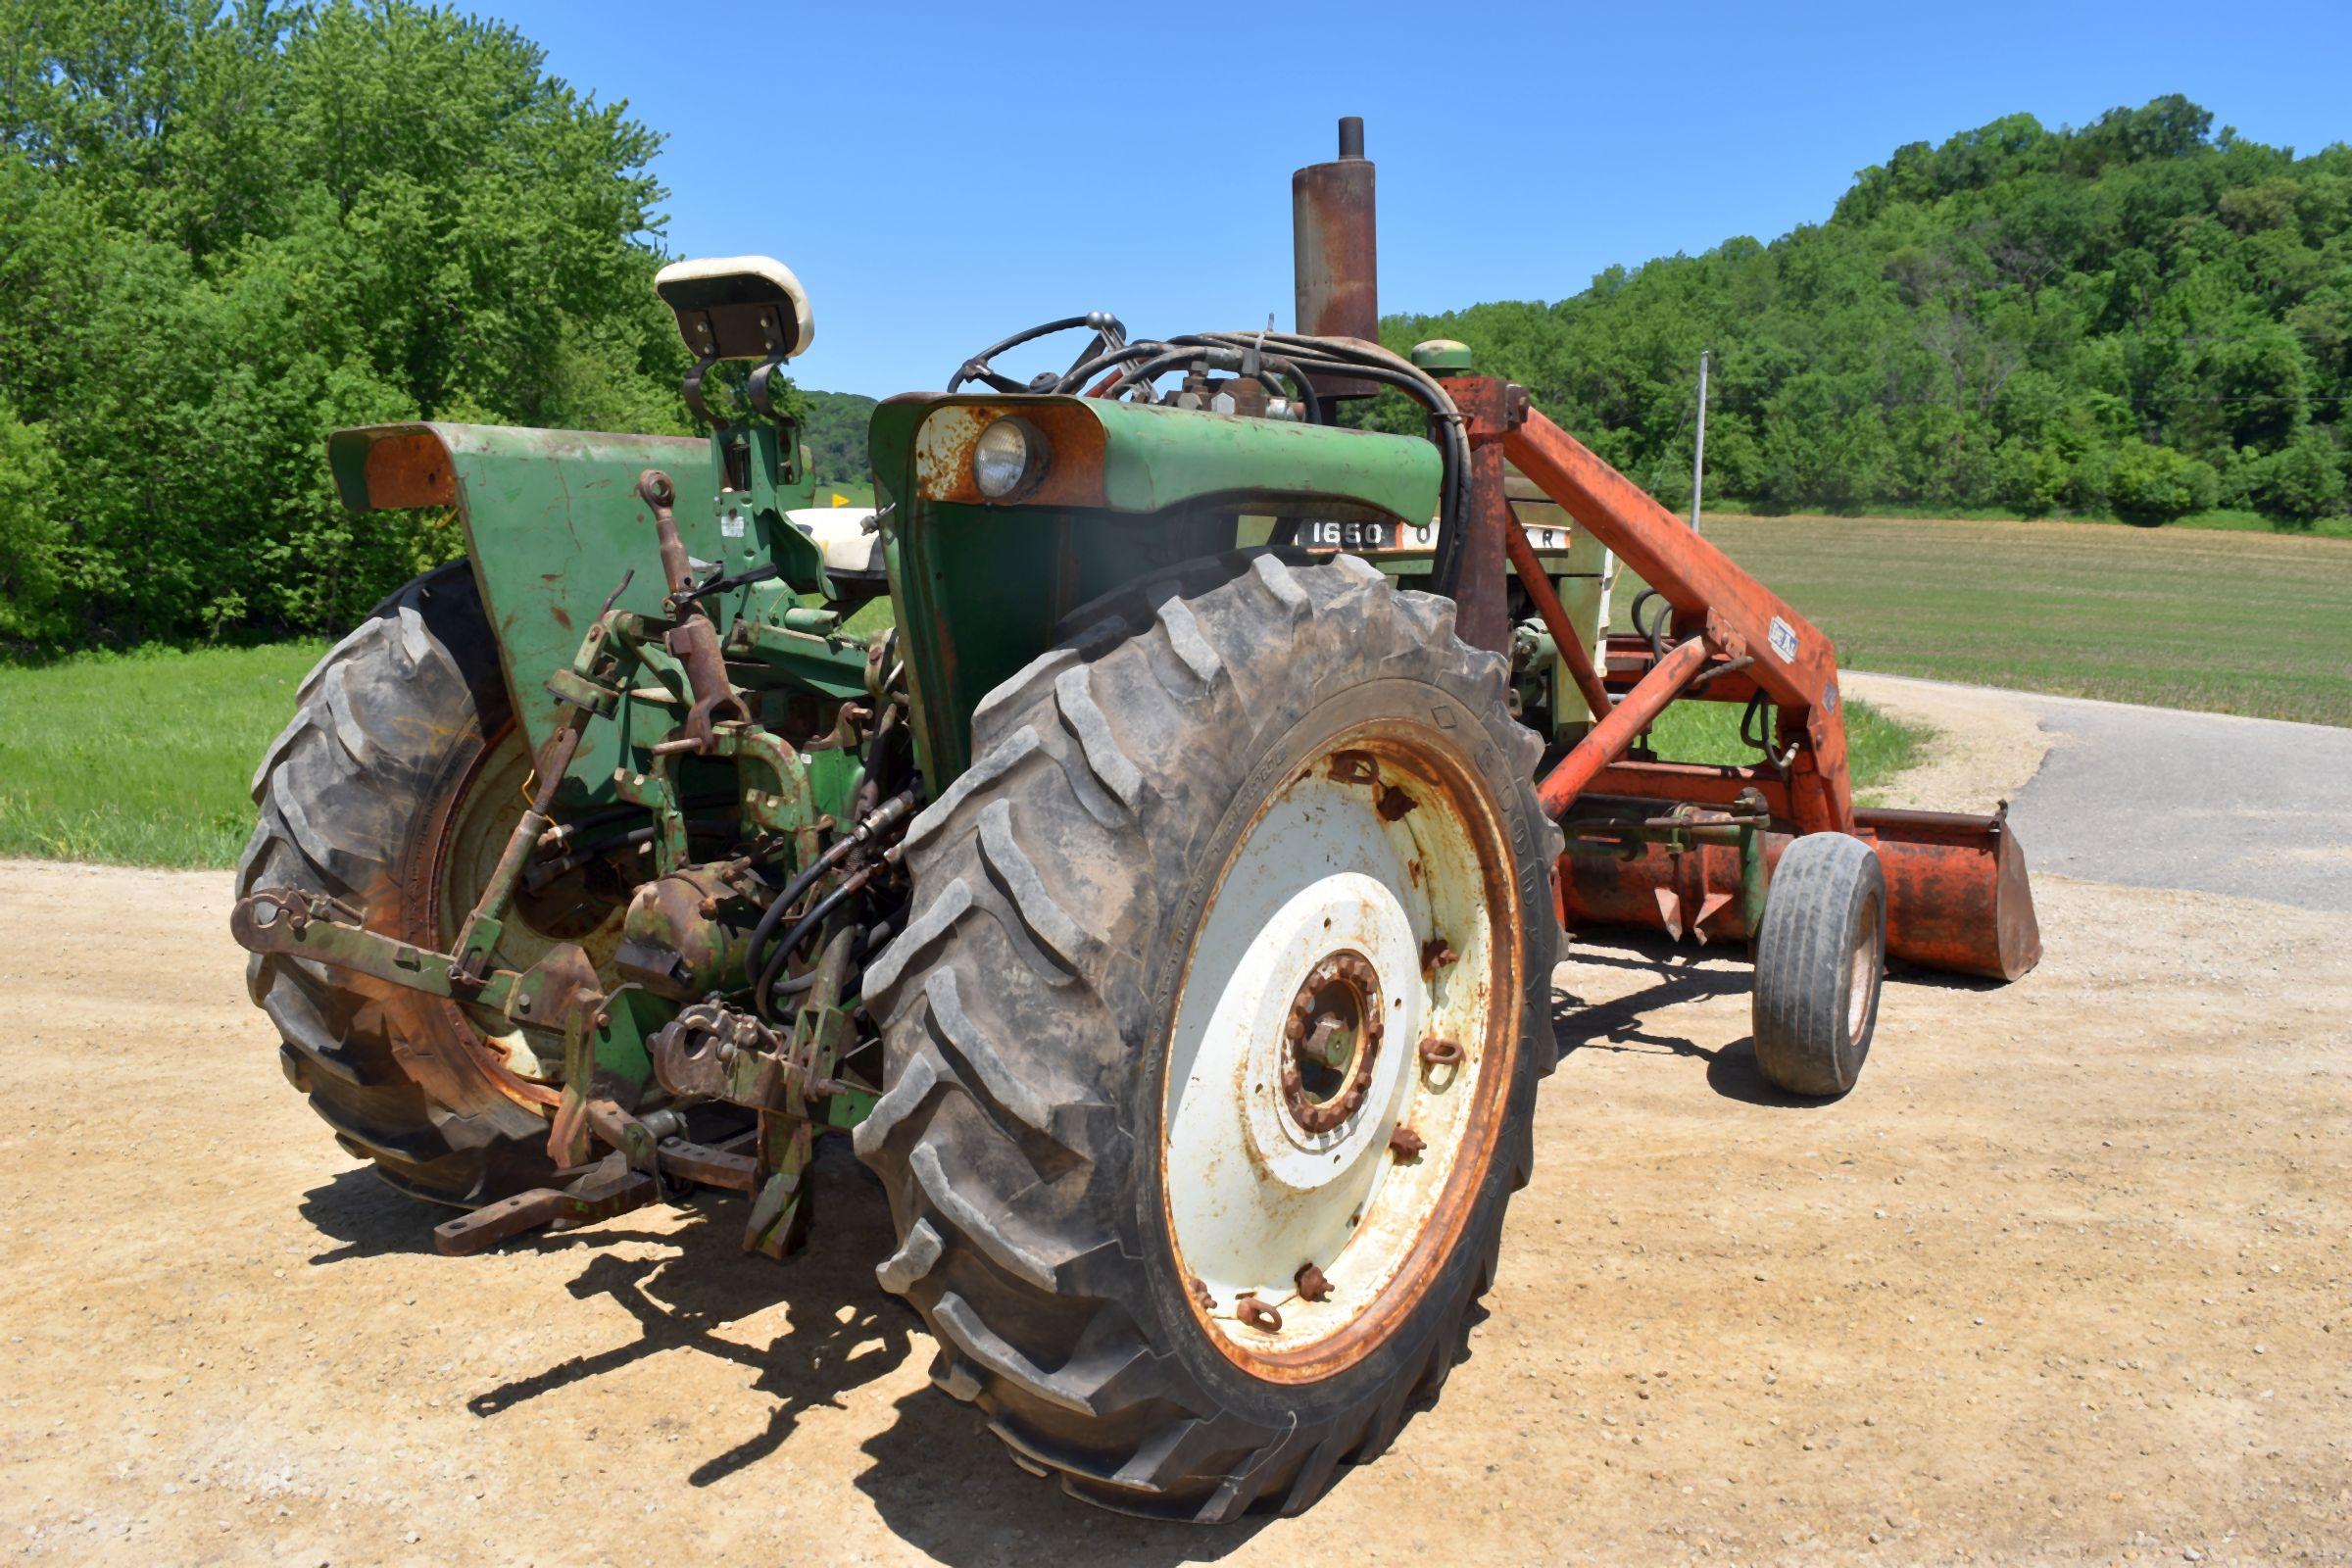 Oliver 1650 Gas Tractor, Wide Front, 15.5x38 Tires, 3pt., 540PTO, 2 Hydraulics, Square Fendes, 4,119